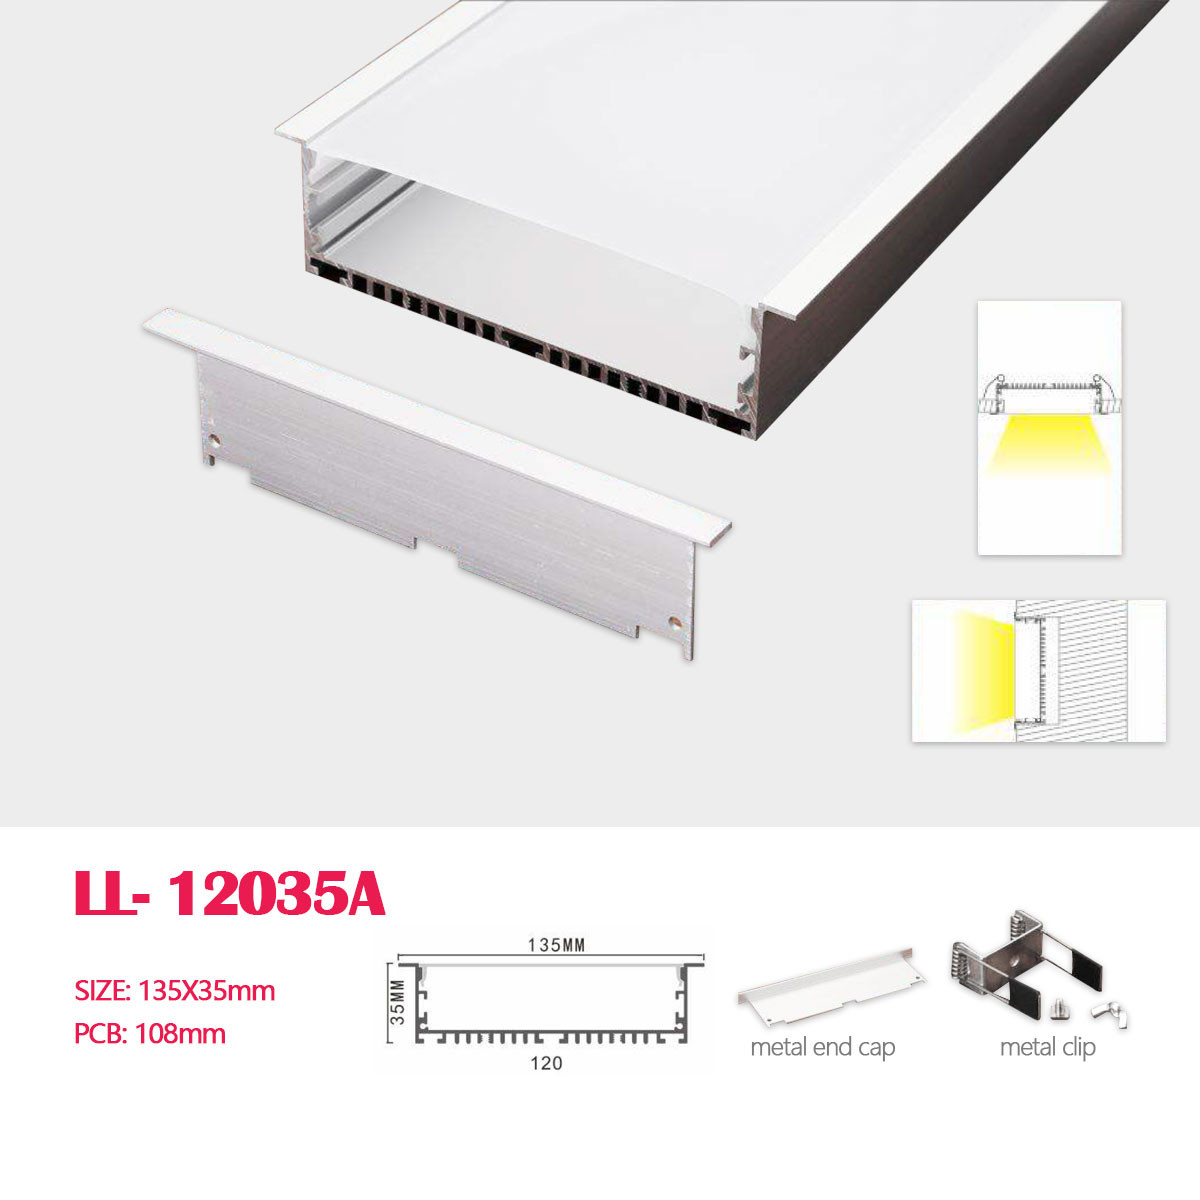 1M (3.28FT) 135MM*35MM Square Extruded Aluminum Profile with Flat PC cover and Clips, Recessed Mounting with Pendant Hardware Included